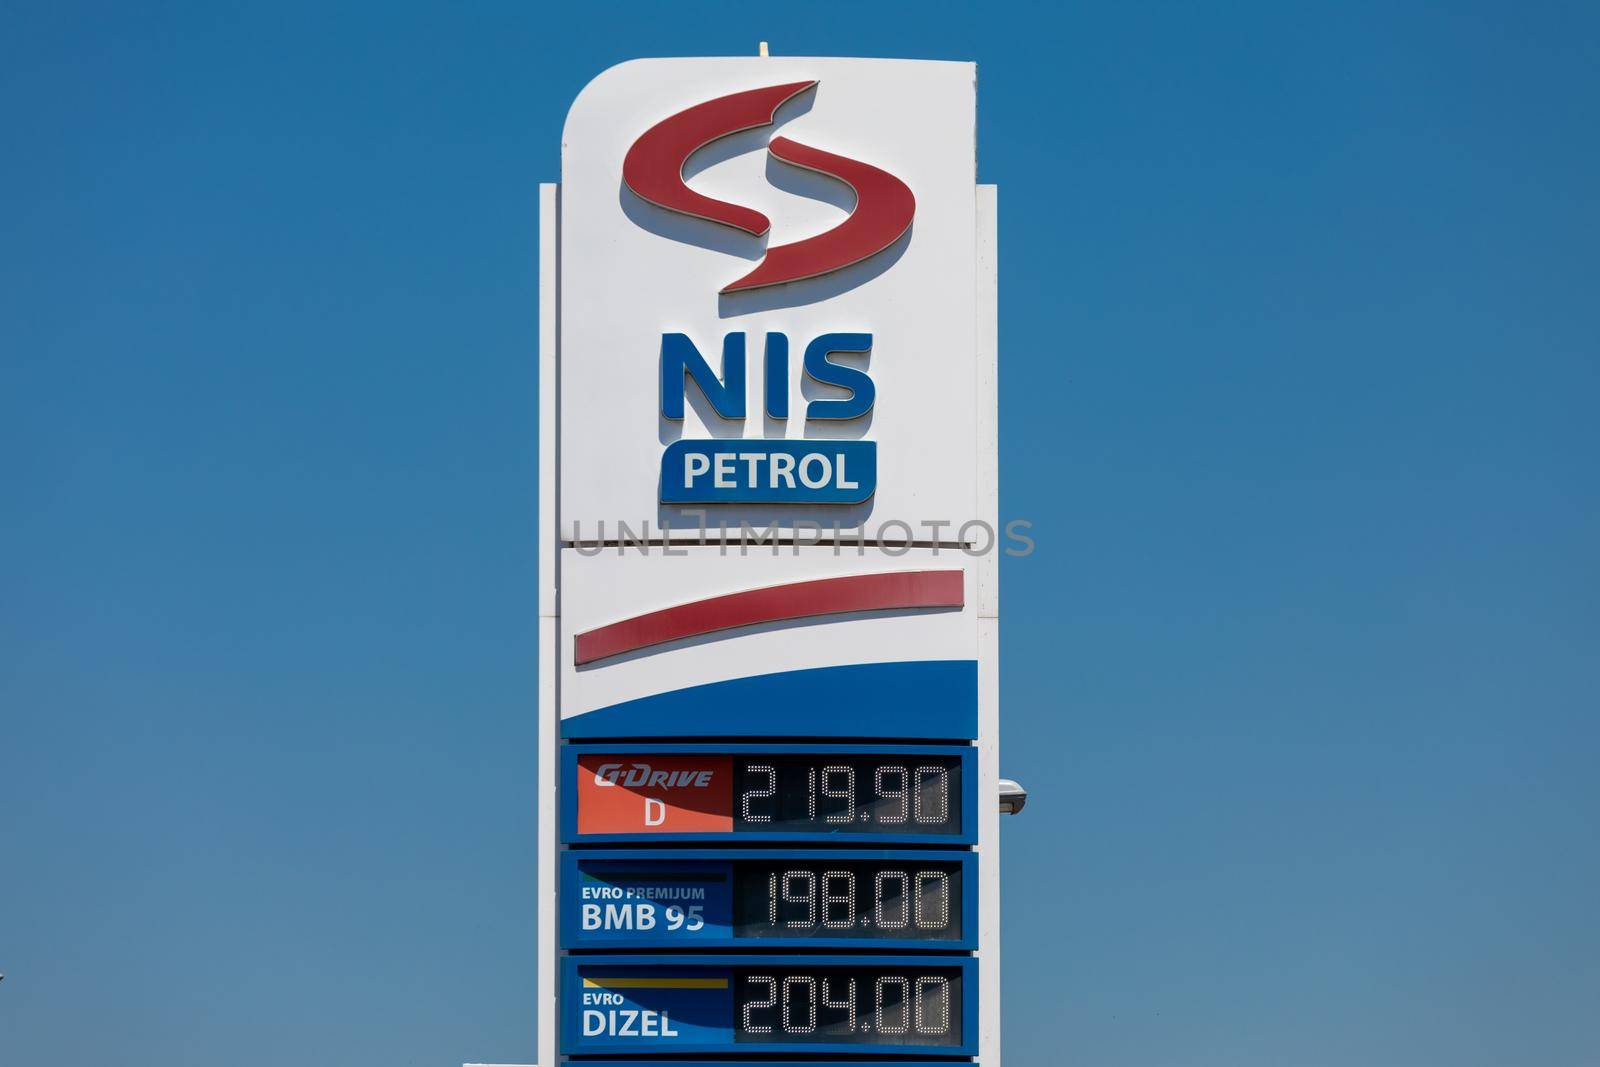 Valjevo, Serbia - June 20, 2022: Logo and sign of NIS Petrol on gas station. NIS Petrol (Oil Industry of Serbia) is an largest oil refining company in Serbia